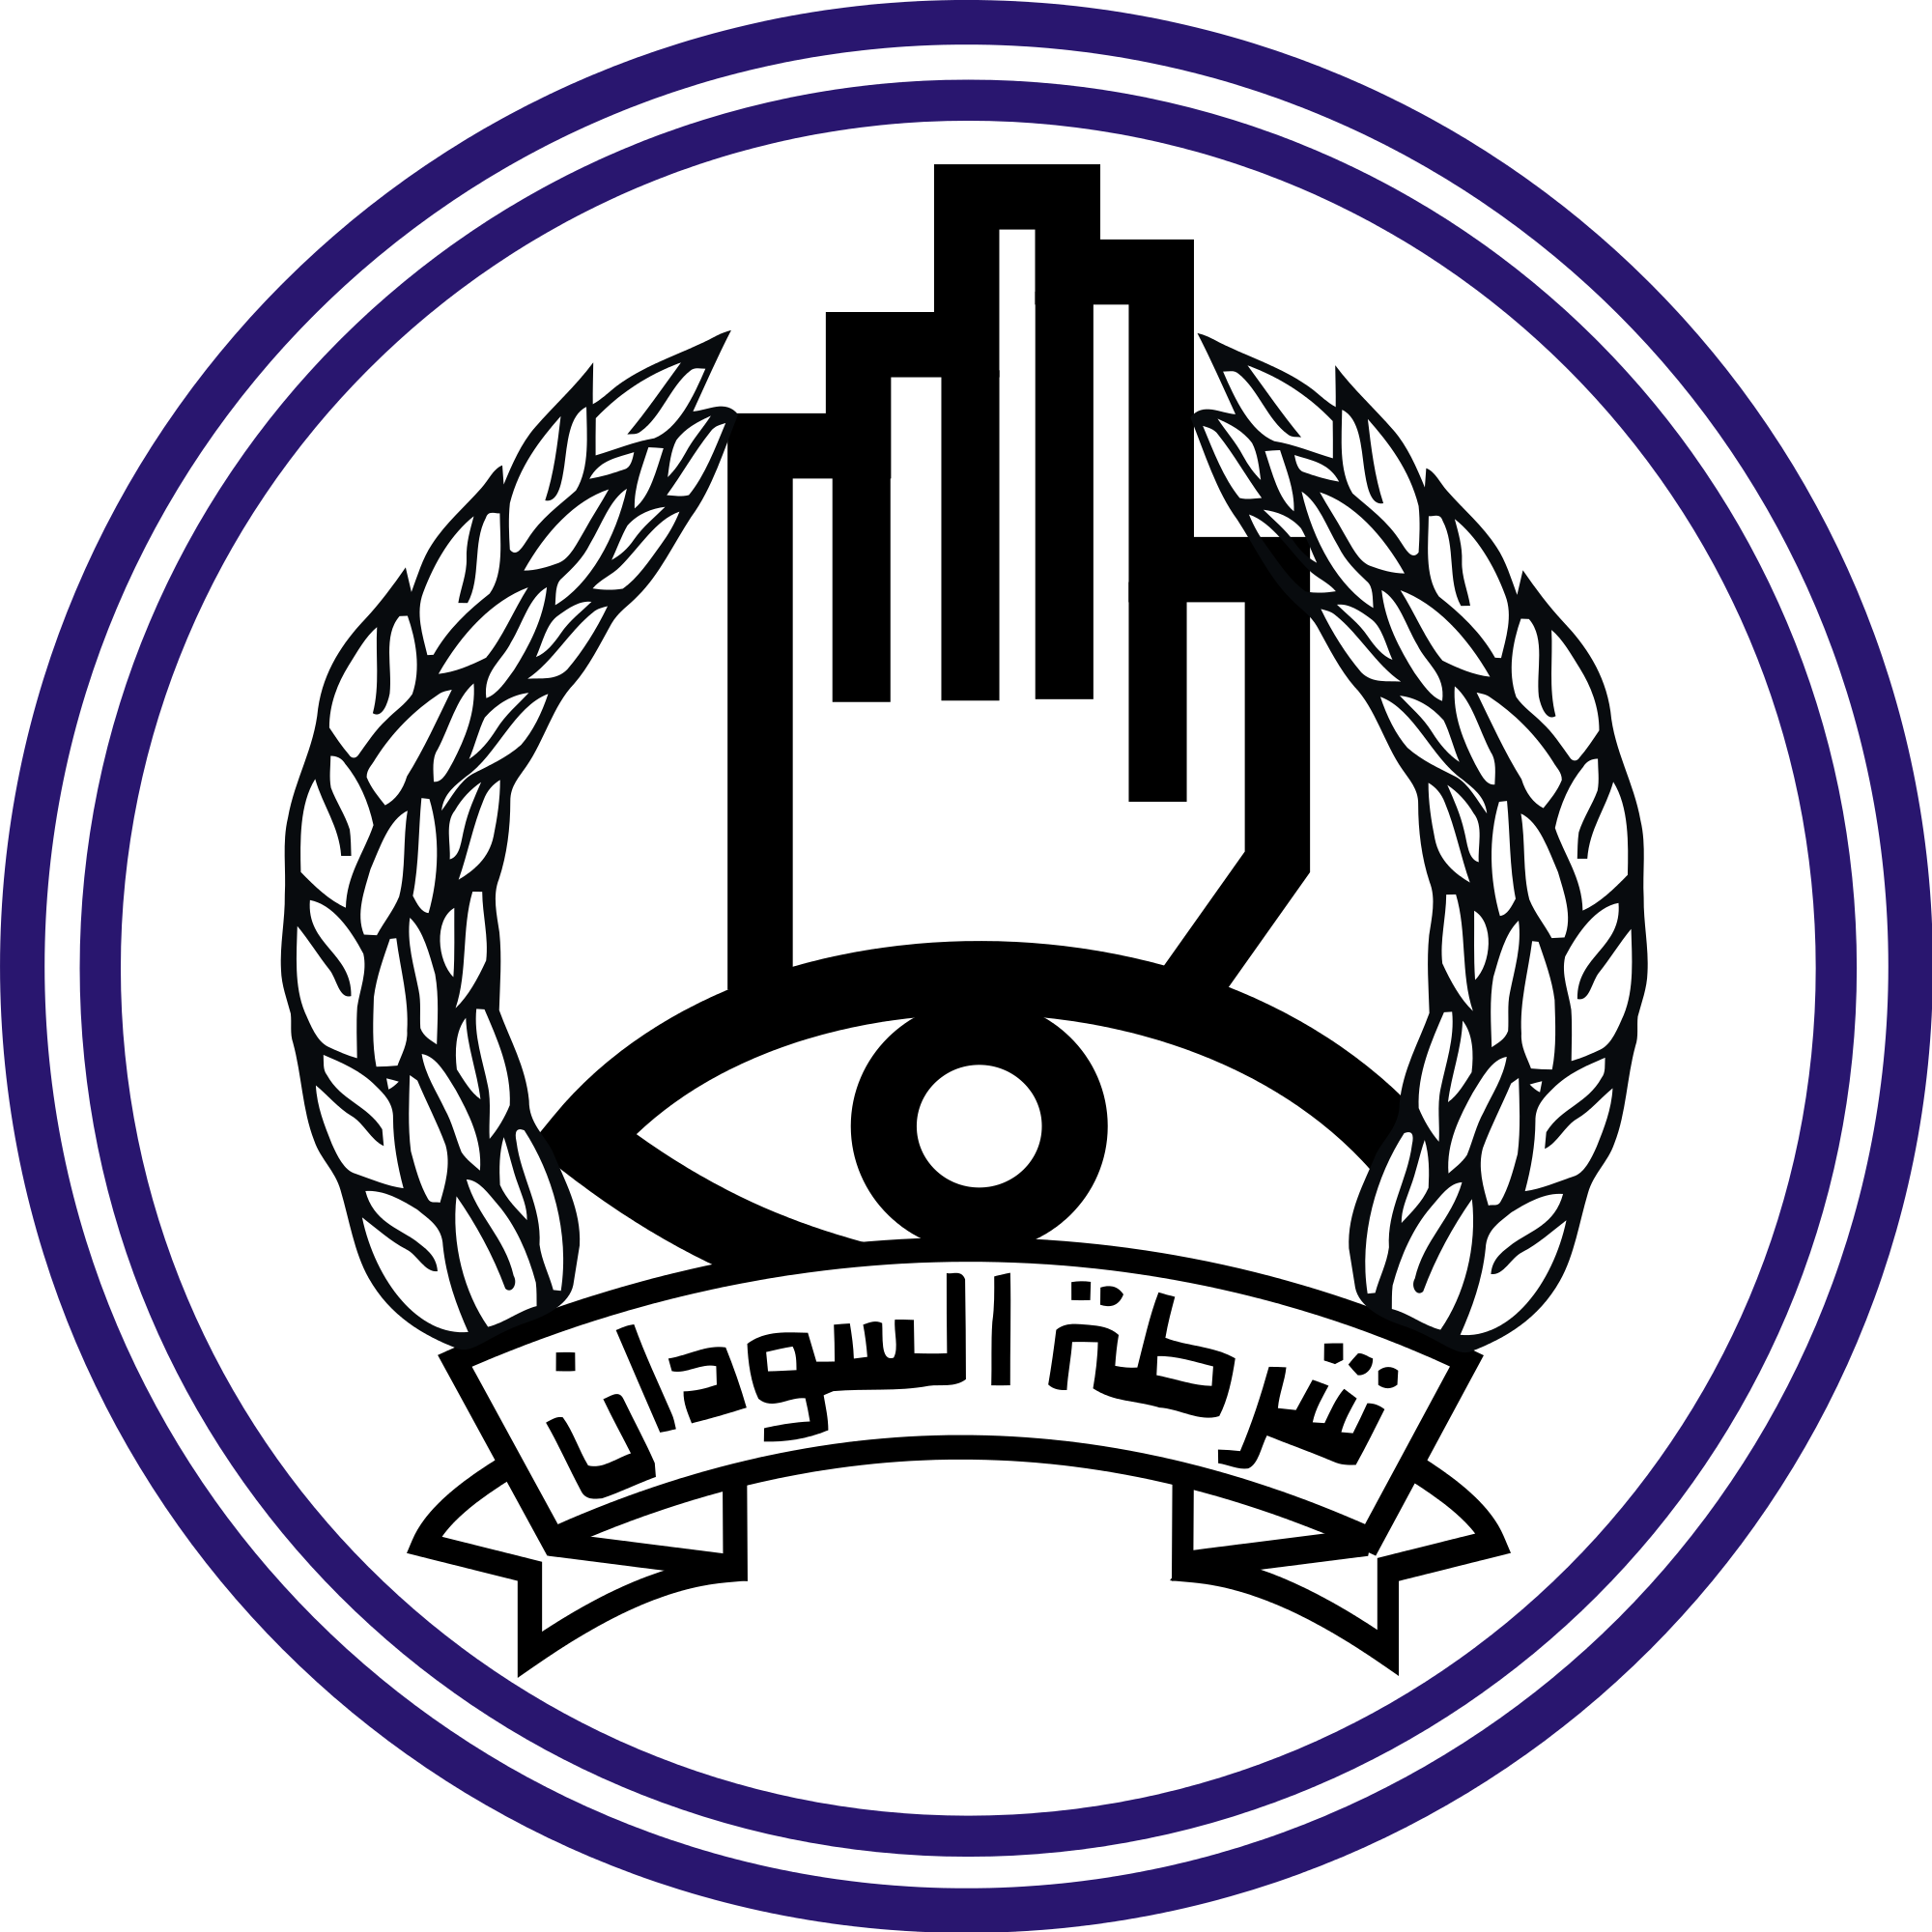 Sudanese Police Force Emblem - Diagram Of A Cricket Pitch (2000x2000)